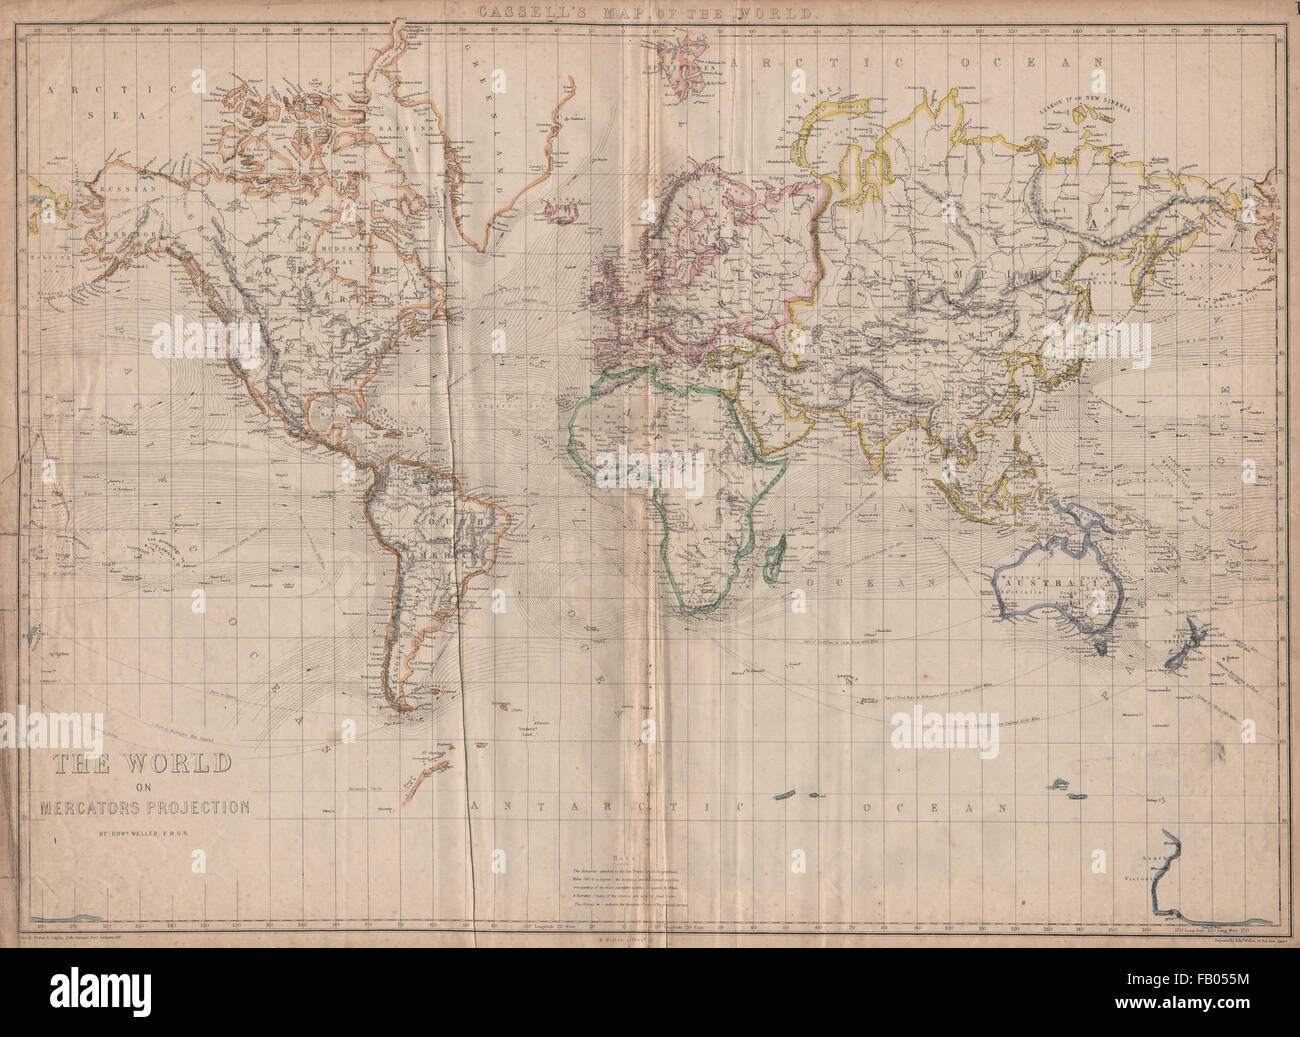 'The World on Mercators Projection'. Shows Mountains of Kong. WELLER, 1862 map Stock Photo